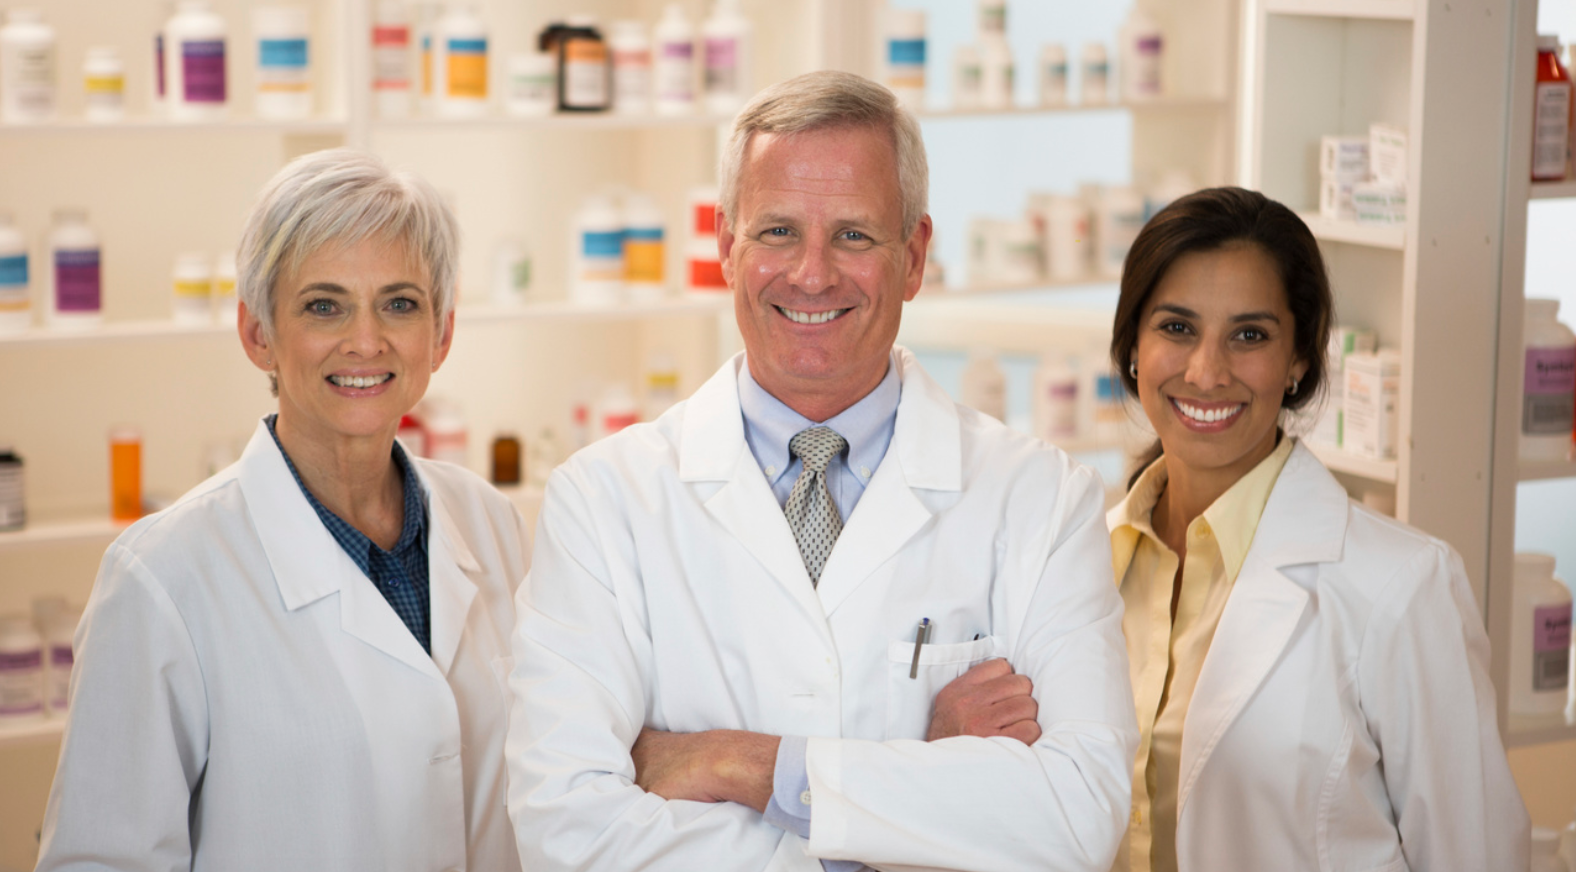 Expanding the Role of Pharmacists in Wake of COVID-19